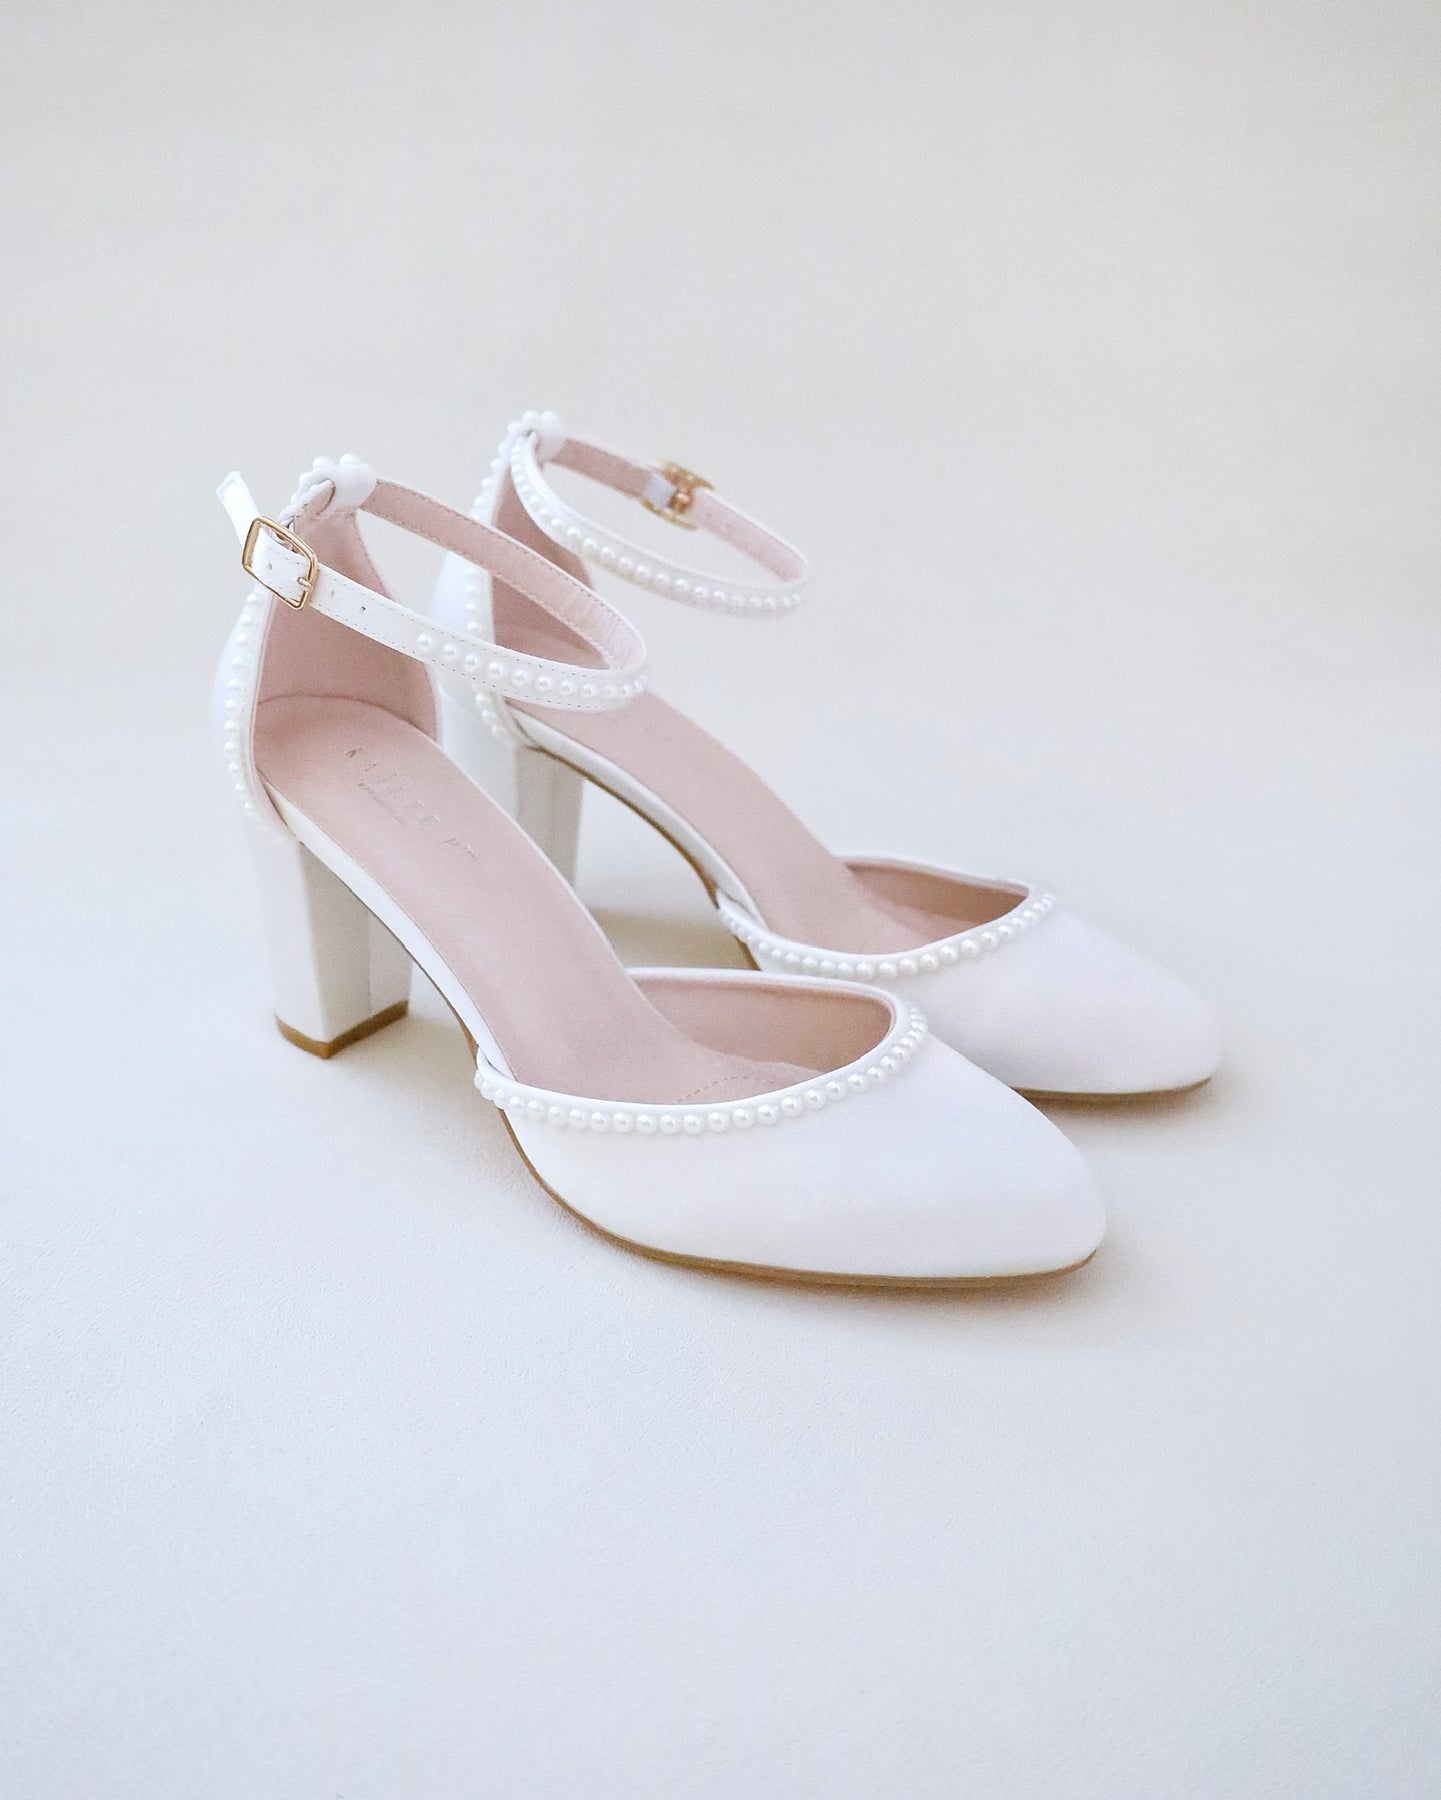 Faux Leather Closed Toe Chunky Heel WHITE | Heels, White high heel shoes,  Trendy heels